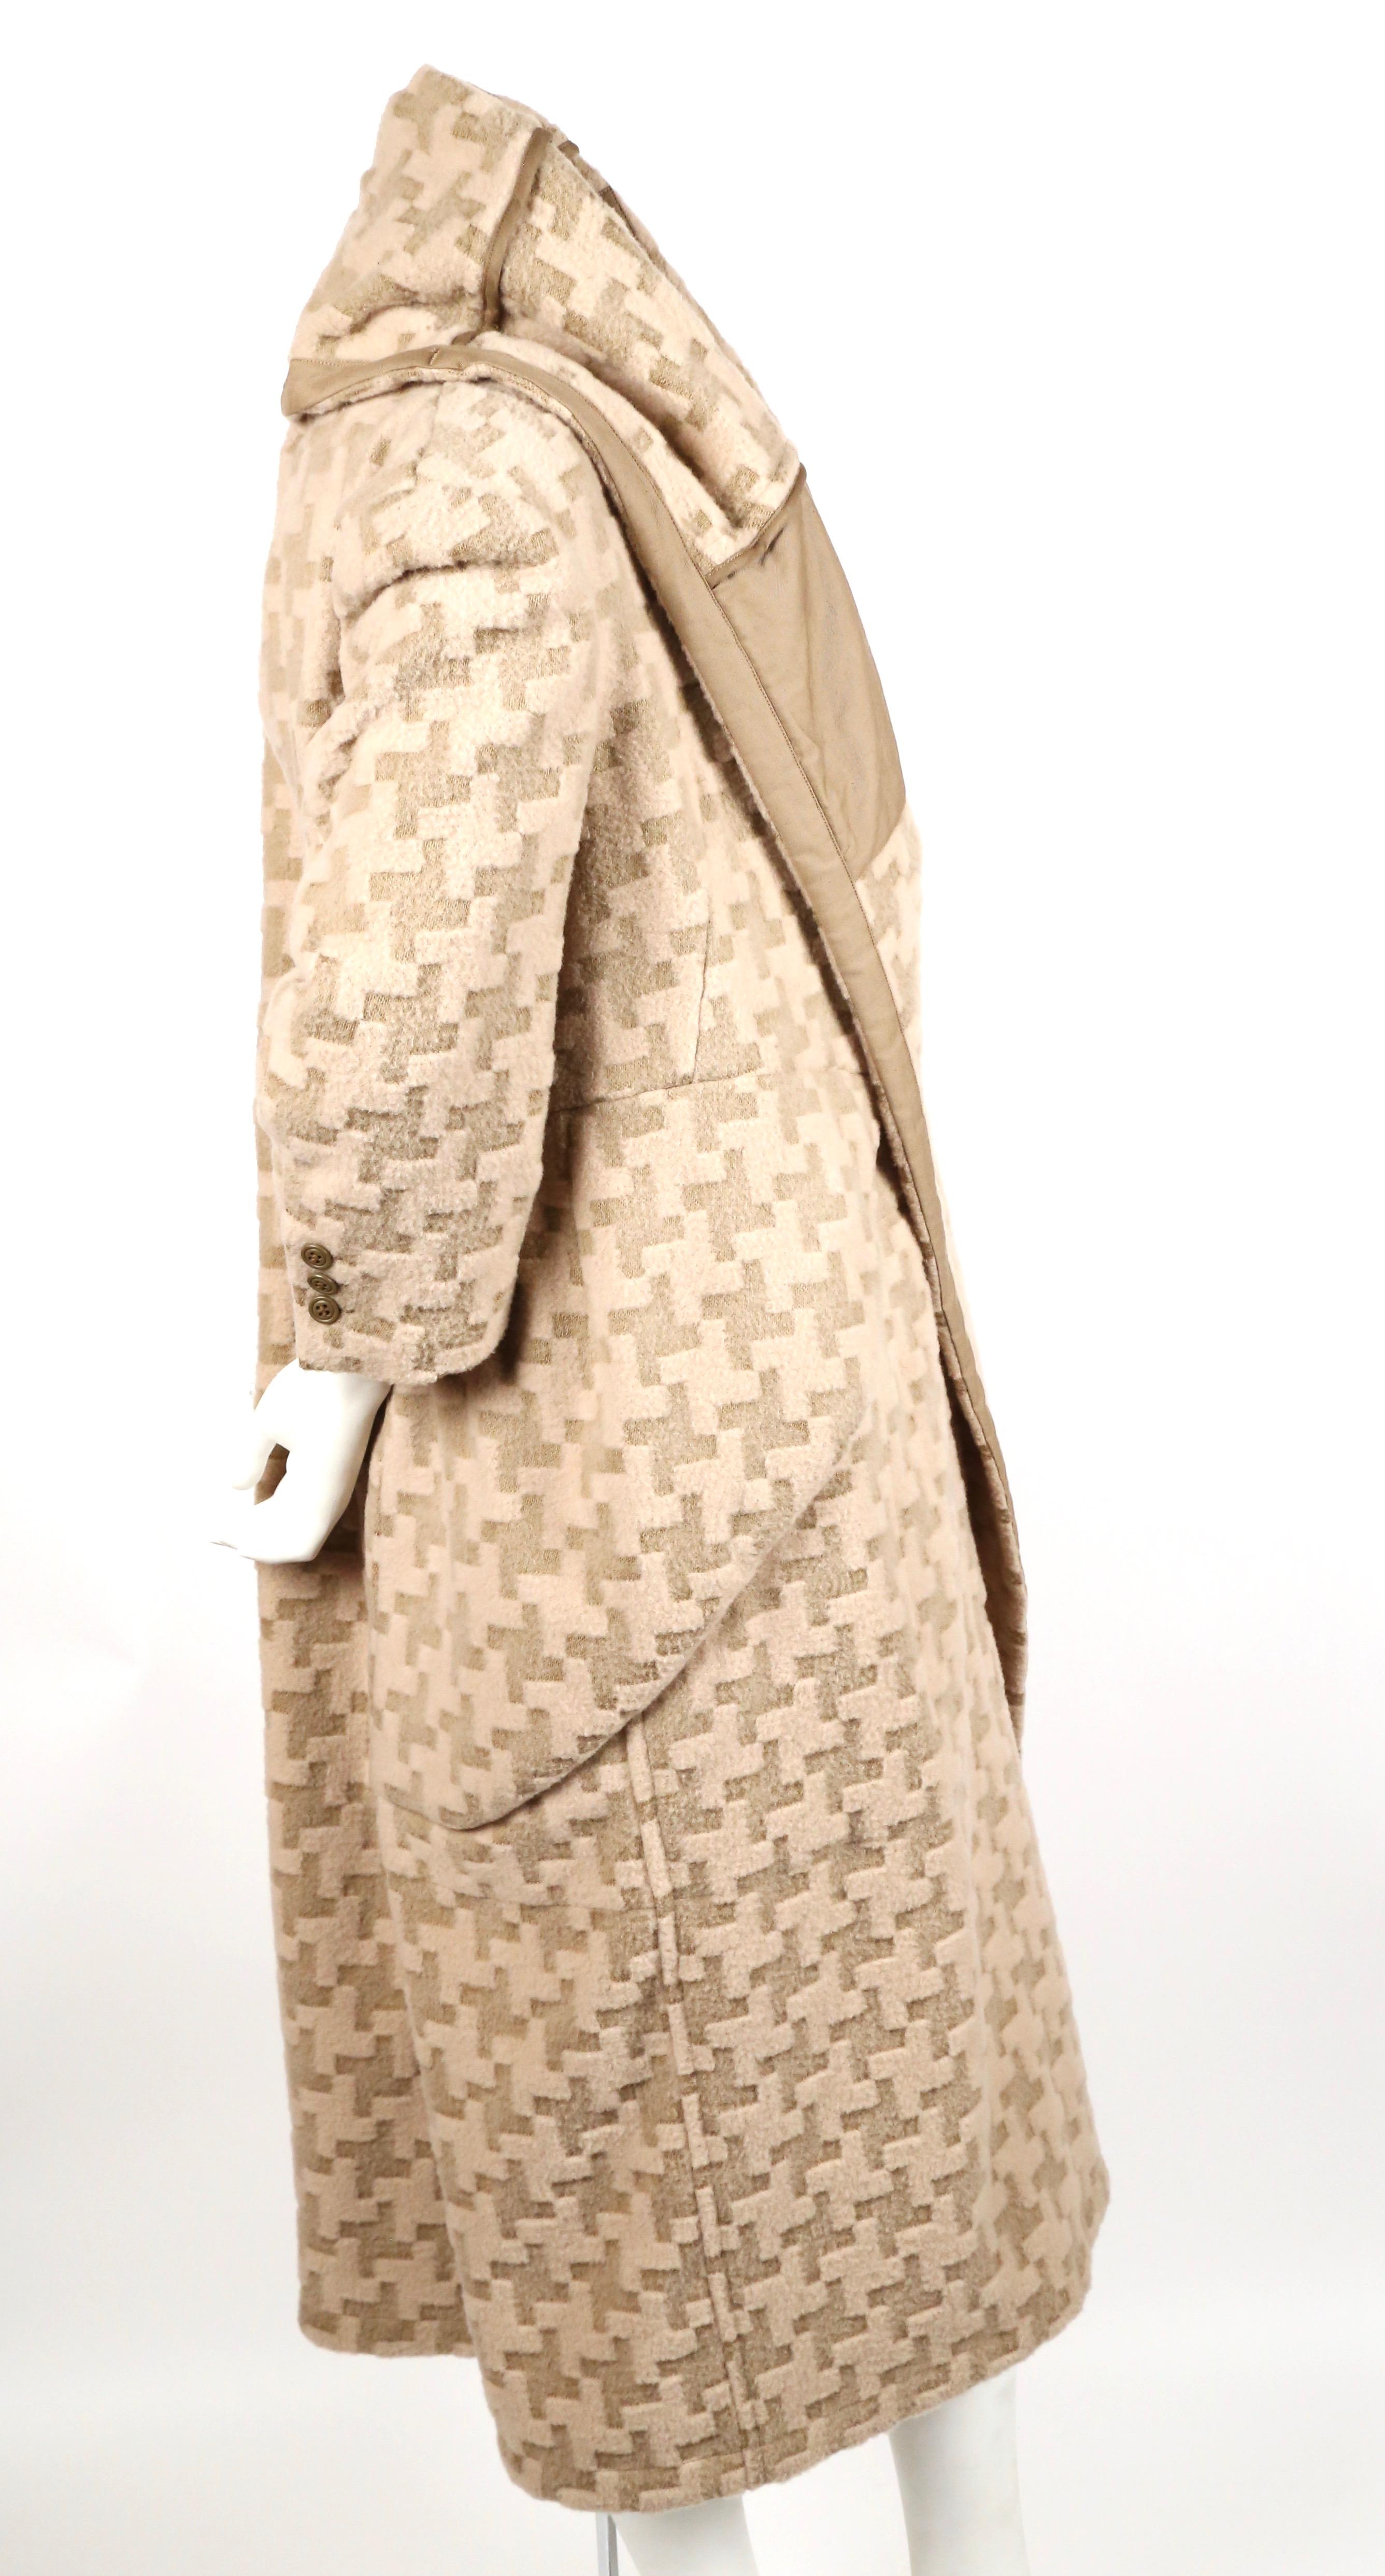 Incredible cream and brown woven houndstooth draped wool coat from Comme Des Garcons. Appears as a coat worn over another coat in a classic 'visual pun' form from CDG. Exact coat as seen on runway. Can be worn numerous ways. Labeled a size 'M'